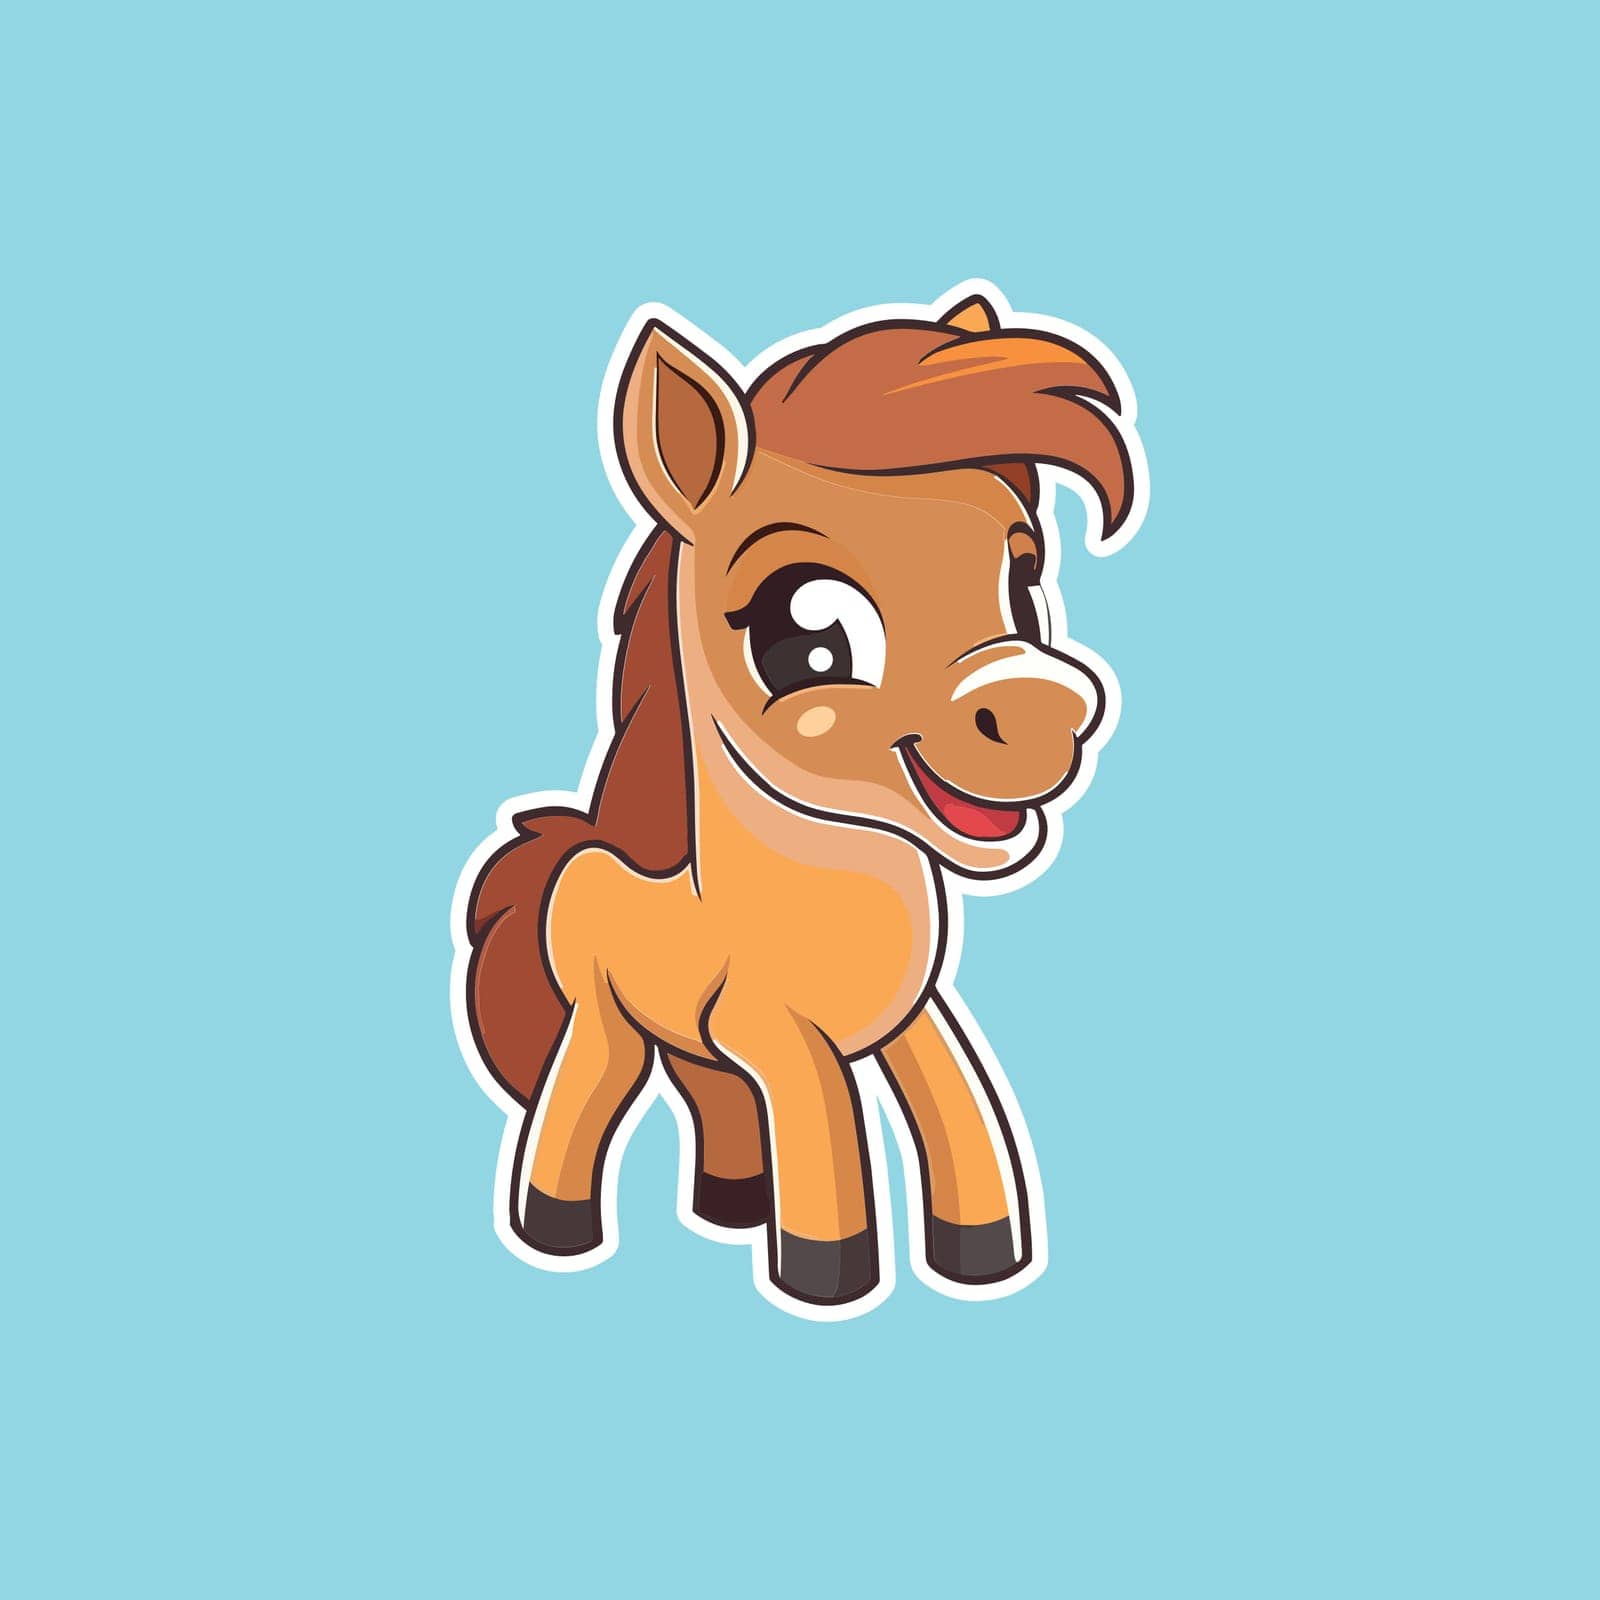 Painted cute funny brown smiling horse sticker